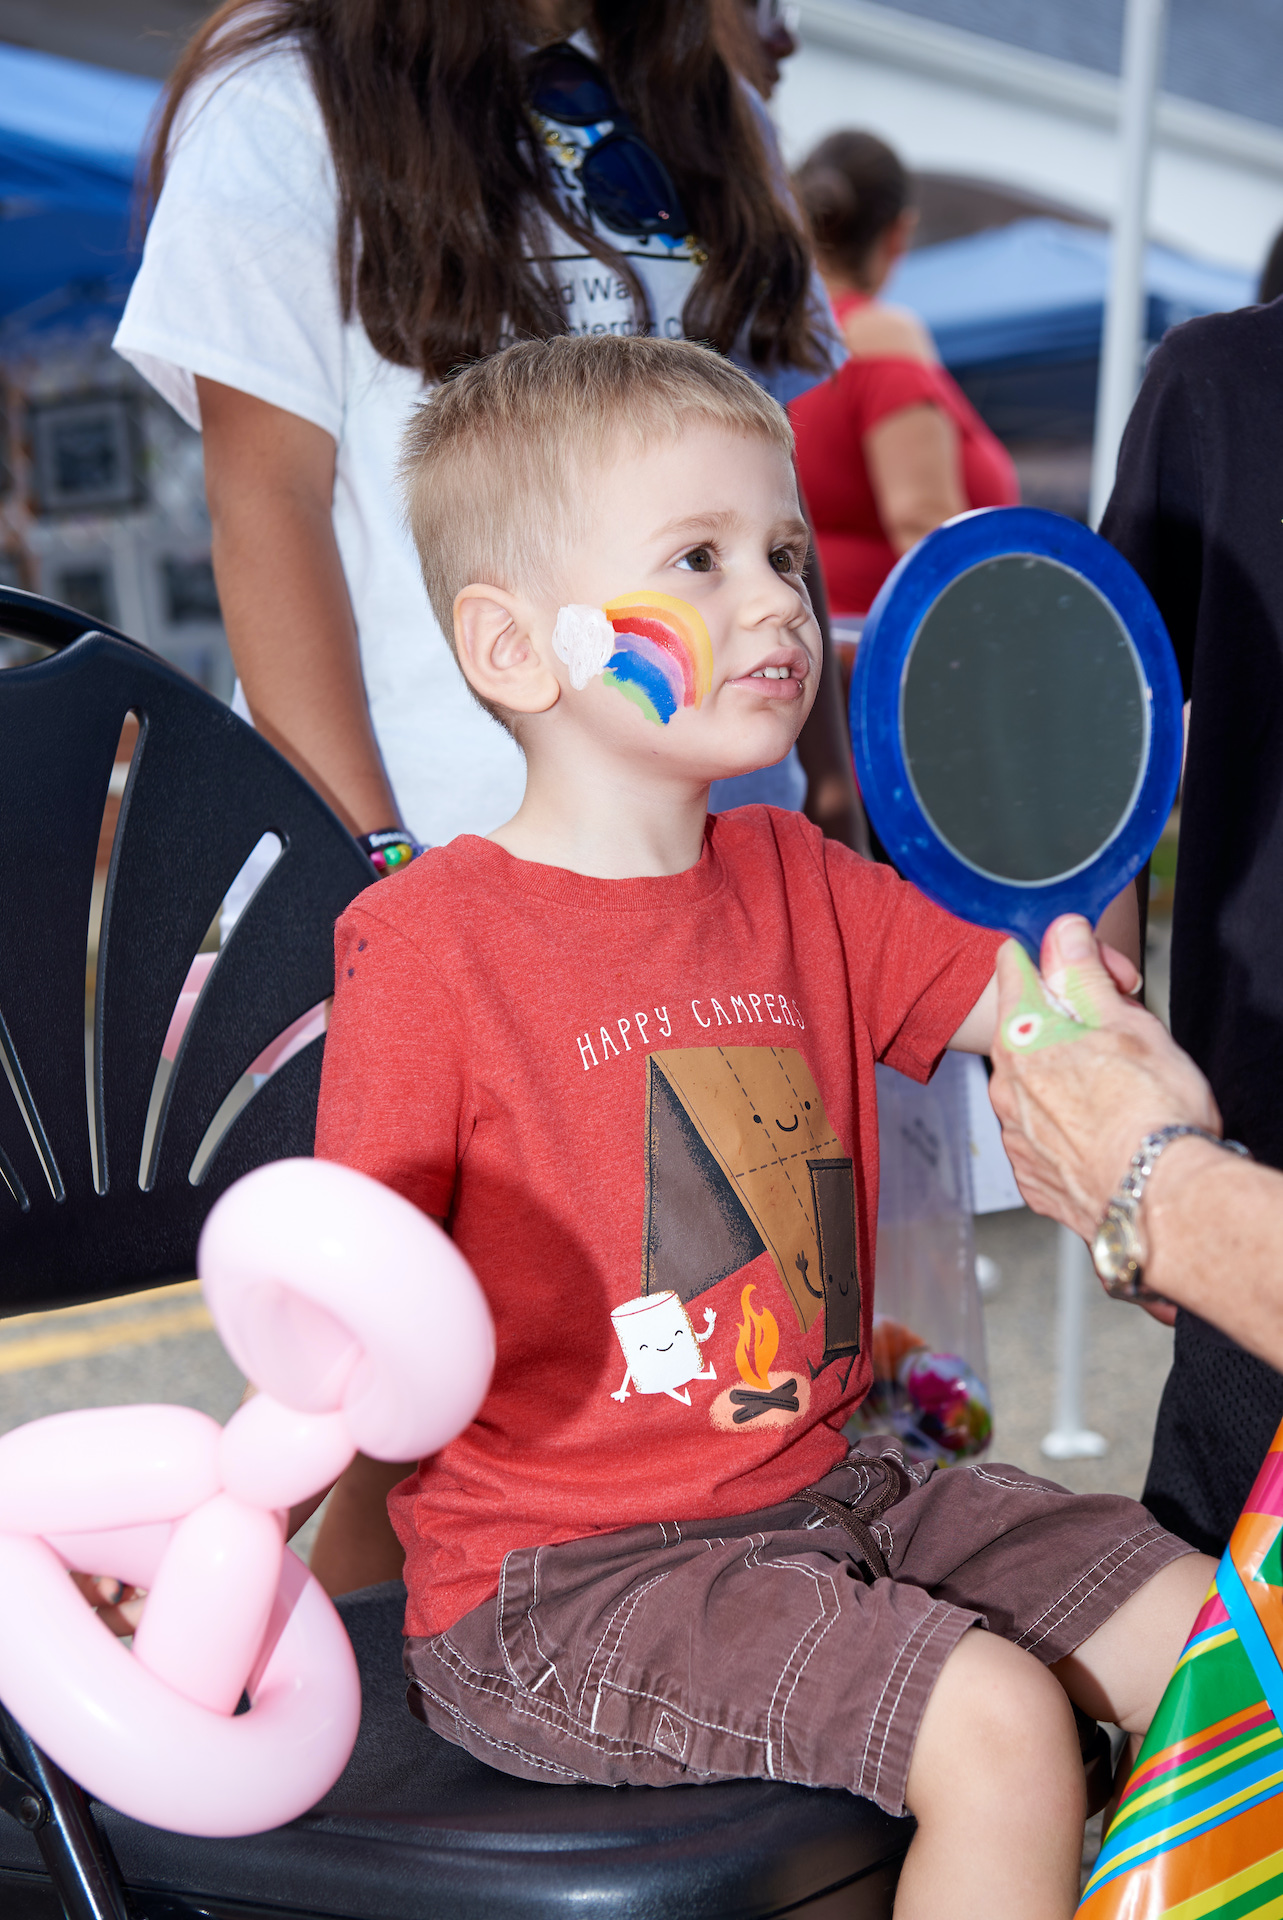 Face painting - the kids' favorite activity!